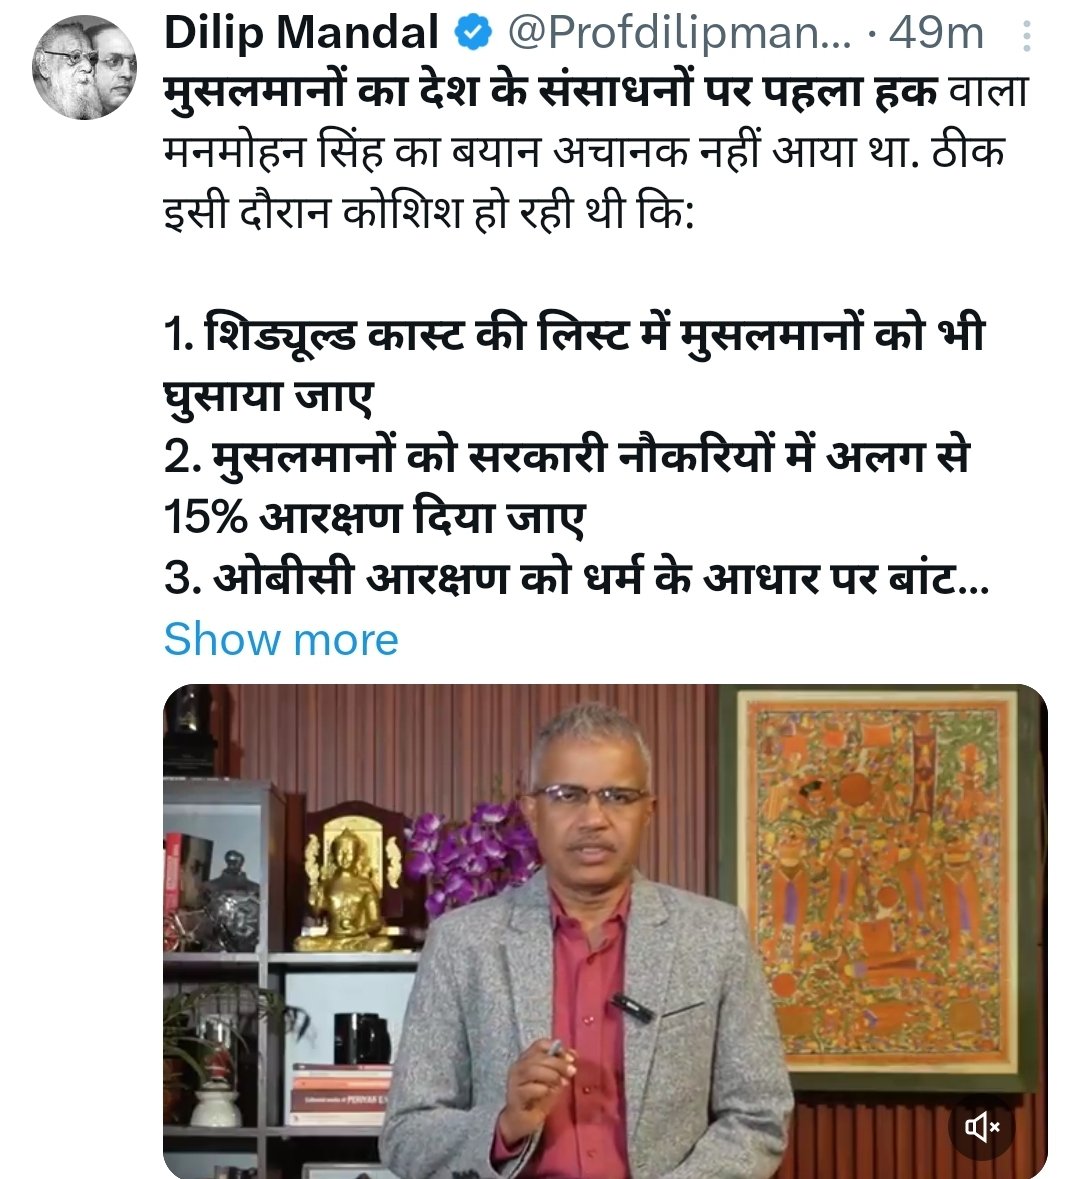 Foot Soldier Dilip Mandal has come to the defense of his master Modi. 

This snake is not only justifying Modi's anti-Muslim propaganda but also spreading it further.

So-called Ambedkarite 🤡